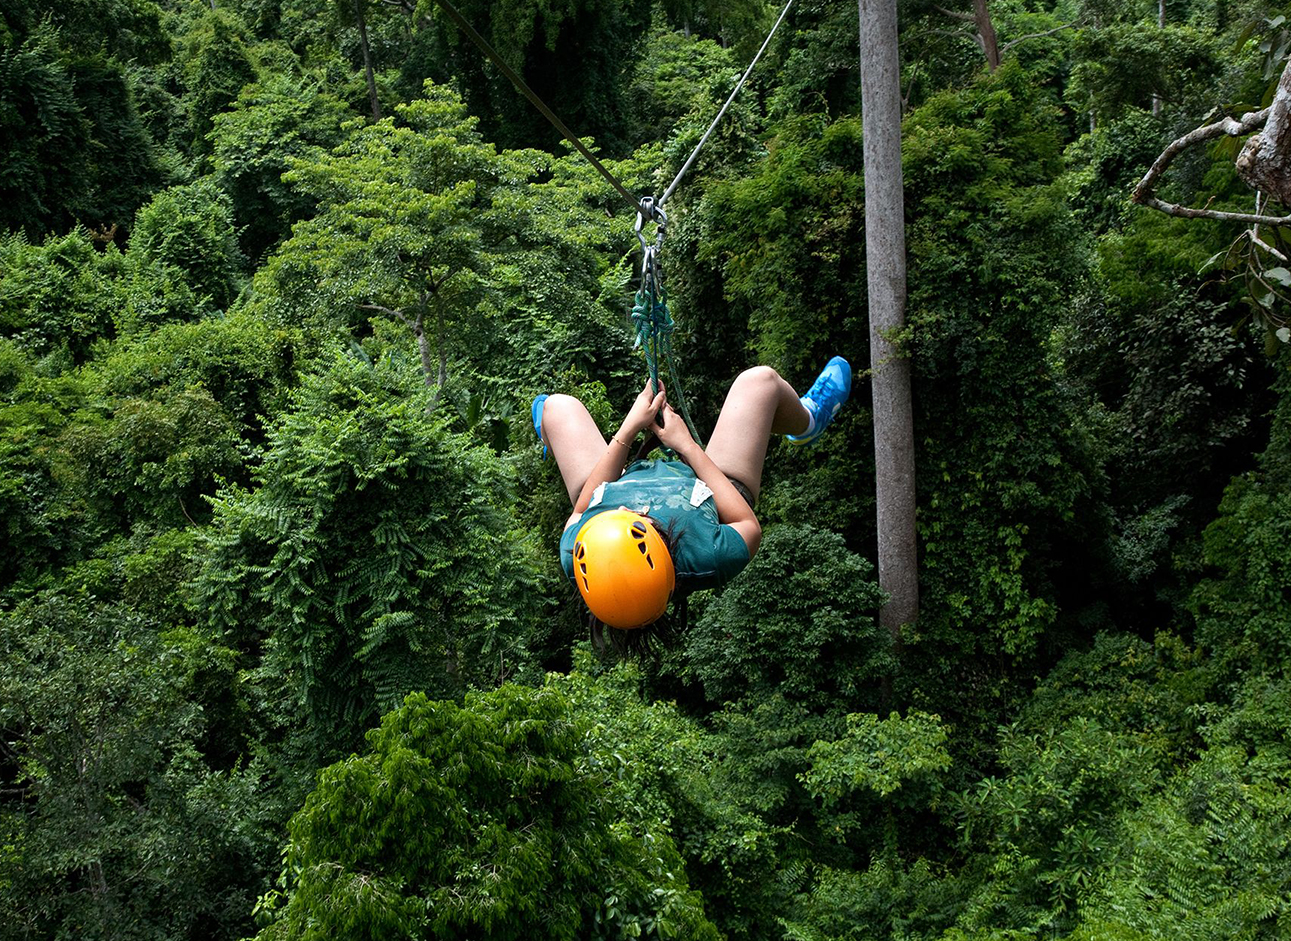 Zipline - Experience the thrill of soaring through the air